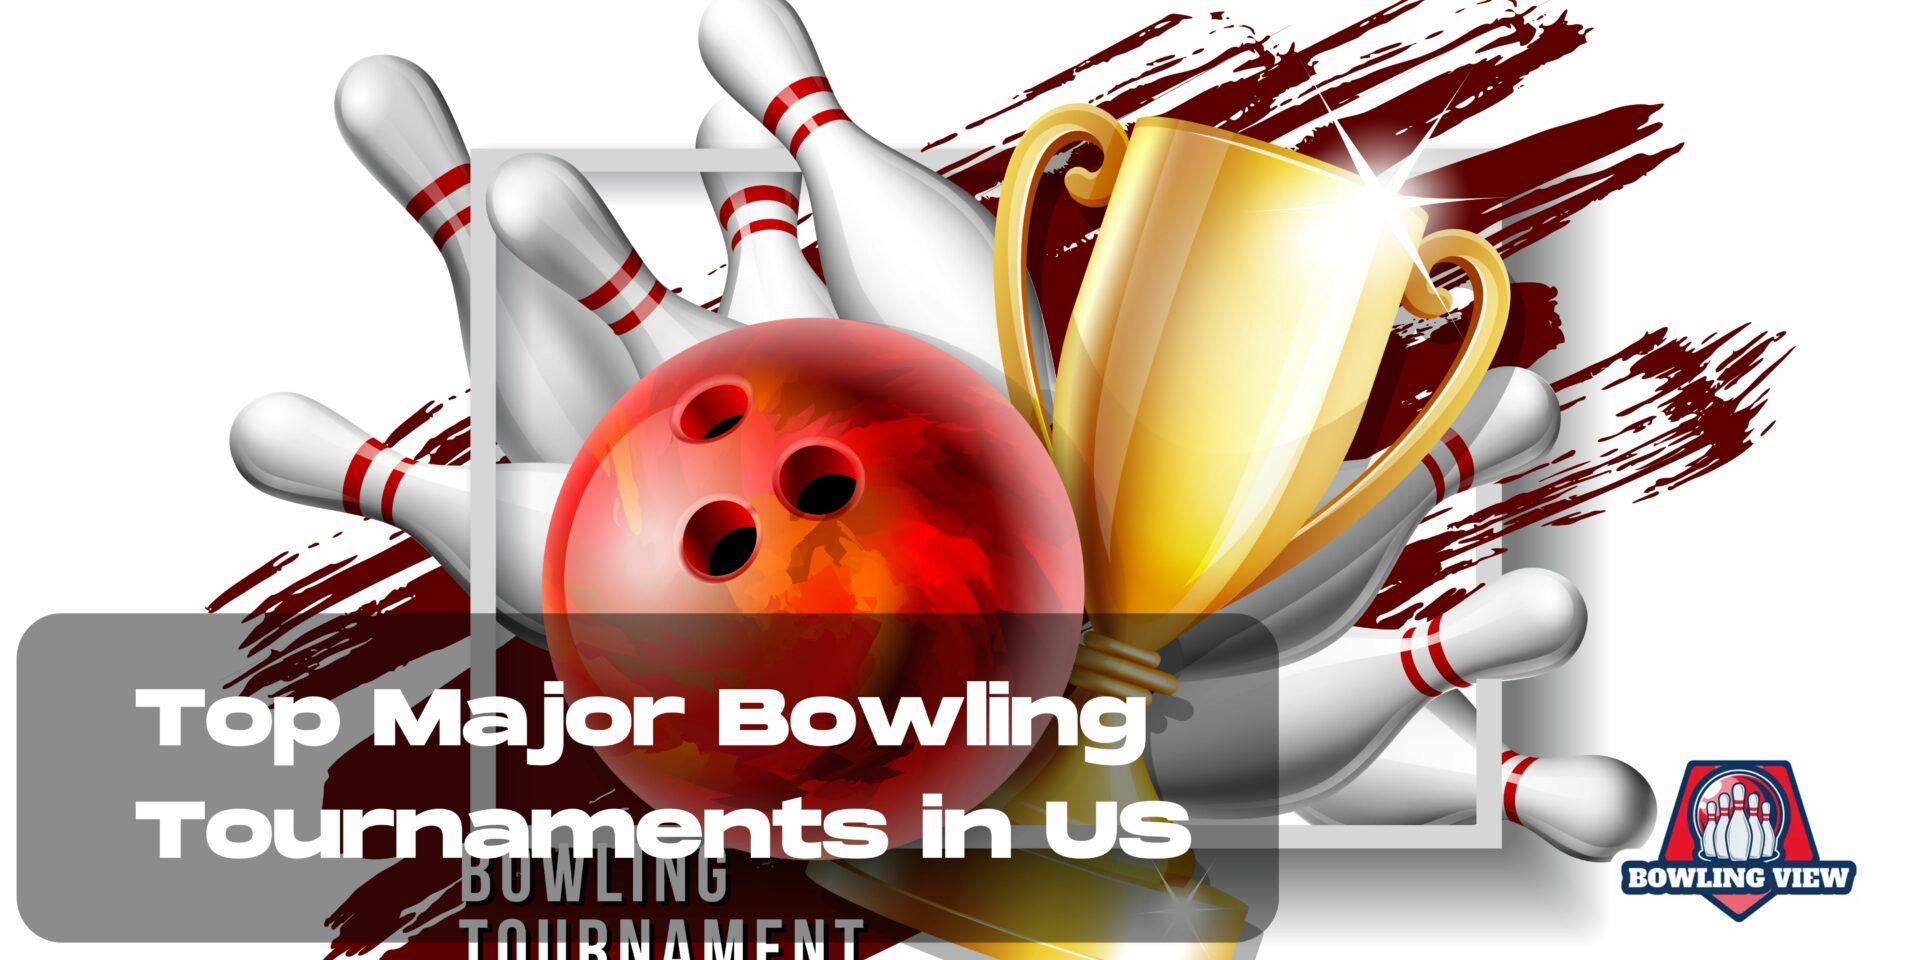 Top Major Bowling Tournaments In US Bowlingview